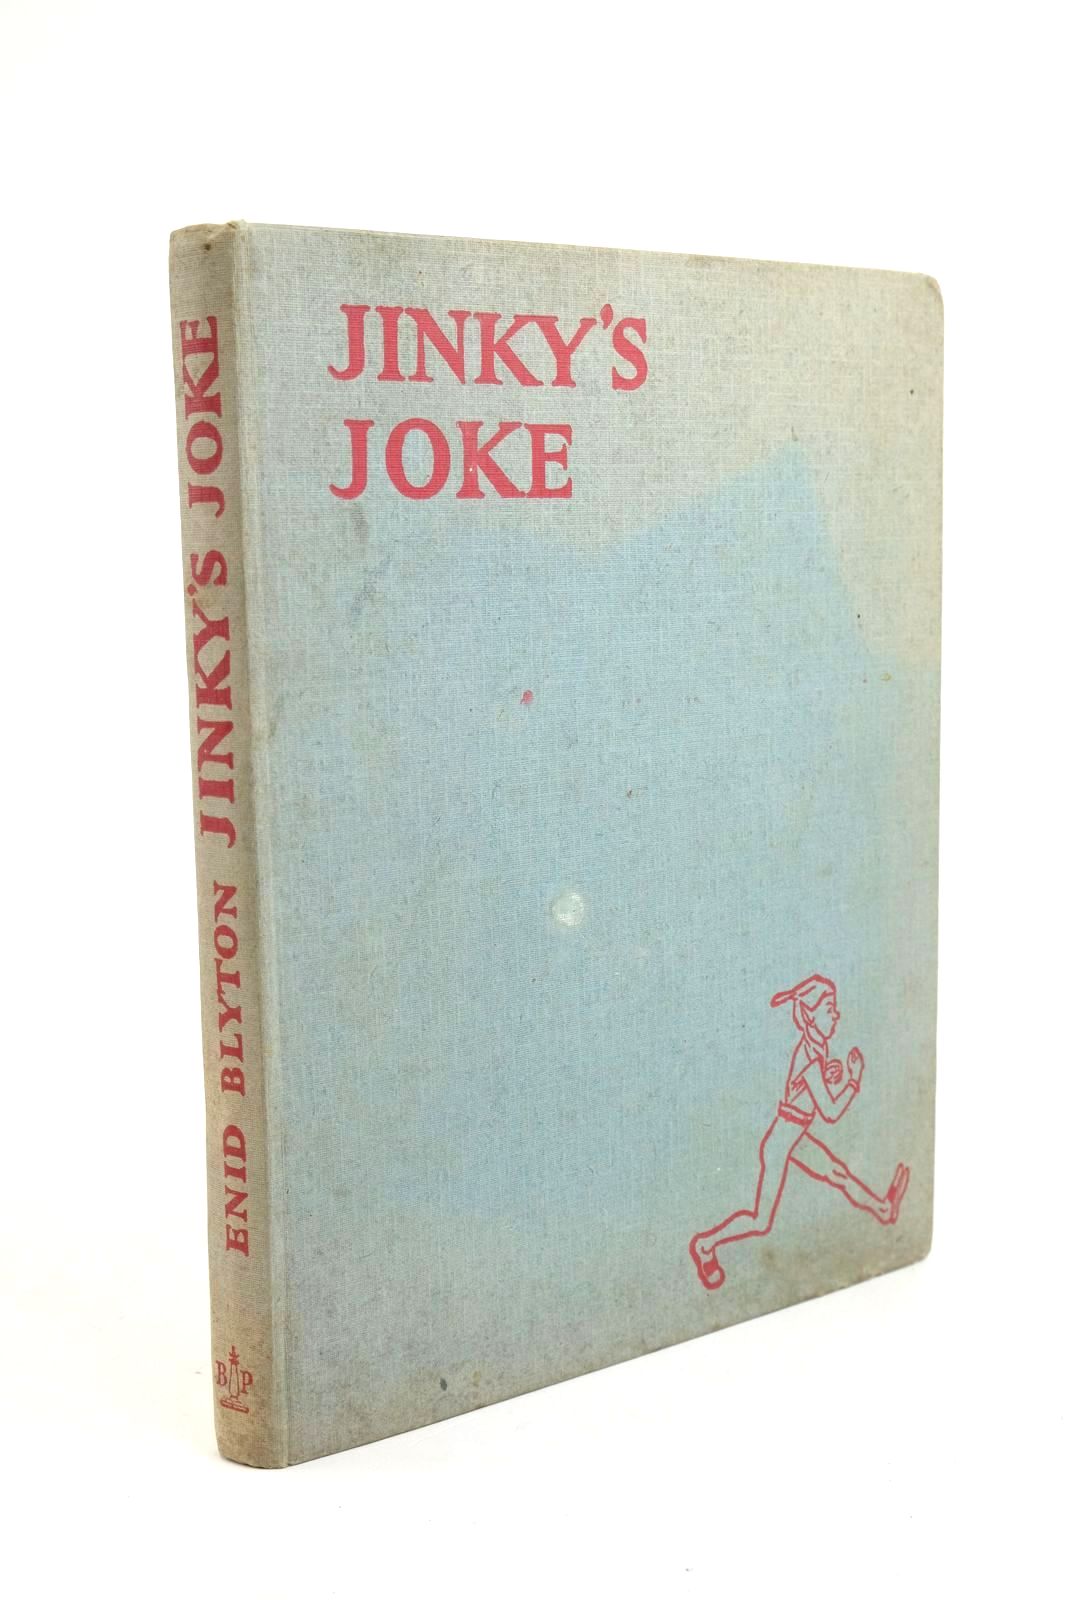 Photo of JINKY'S JOKE AND OTHER STORIES- Stock Number: 1321535